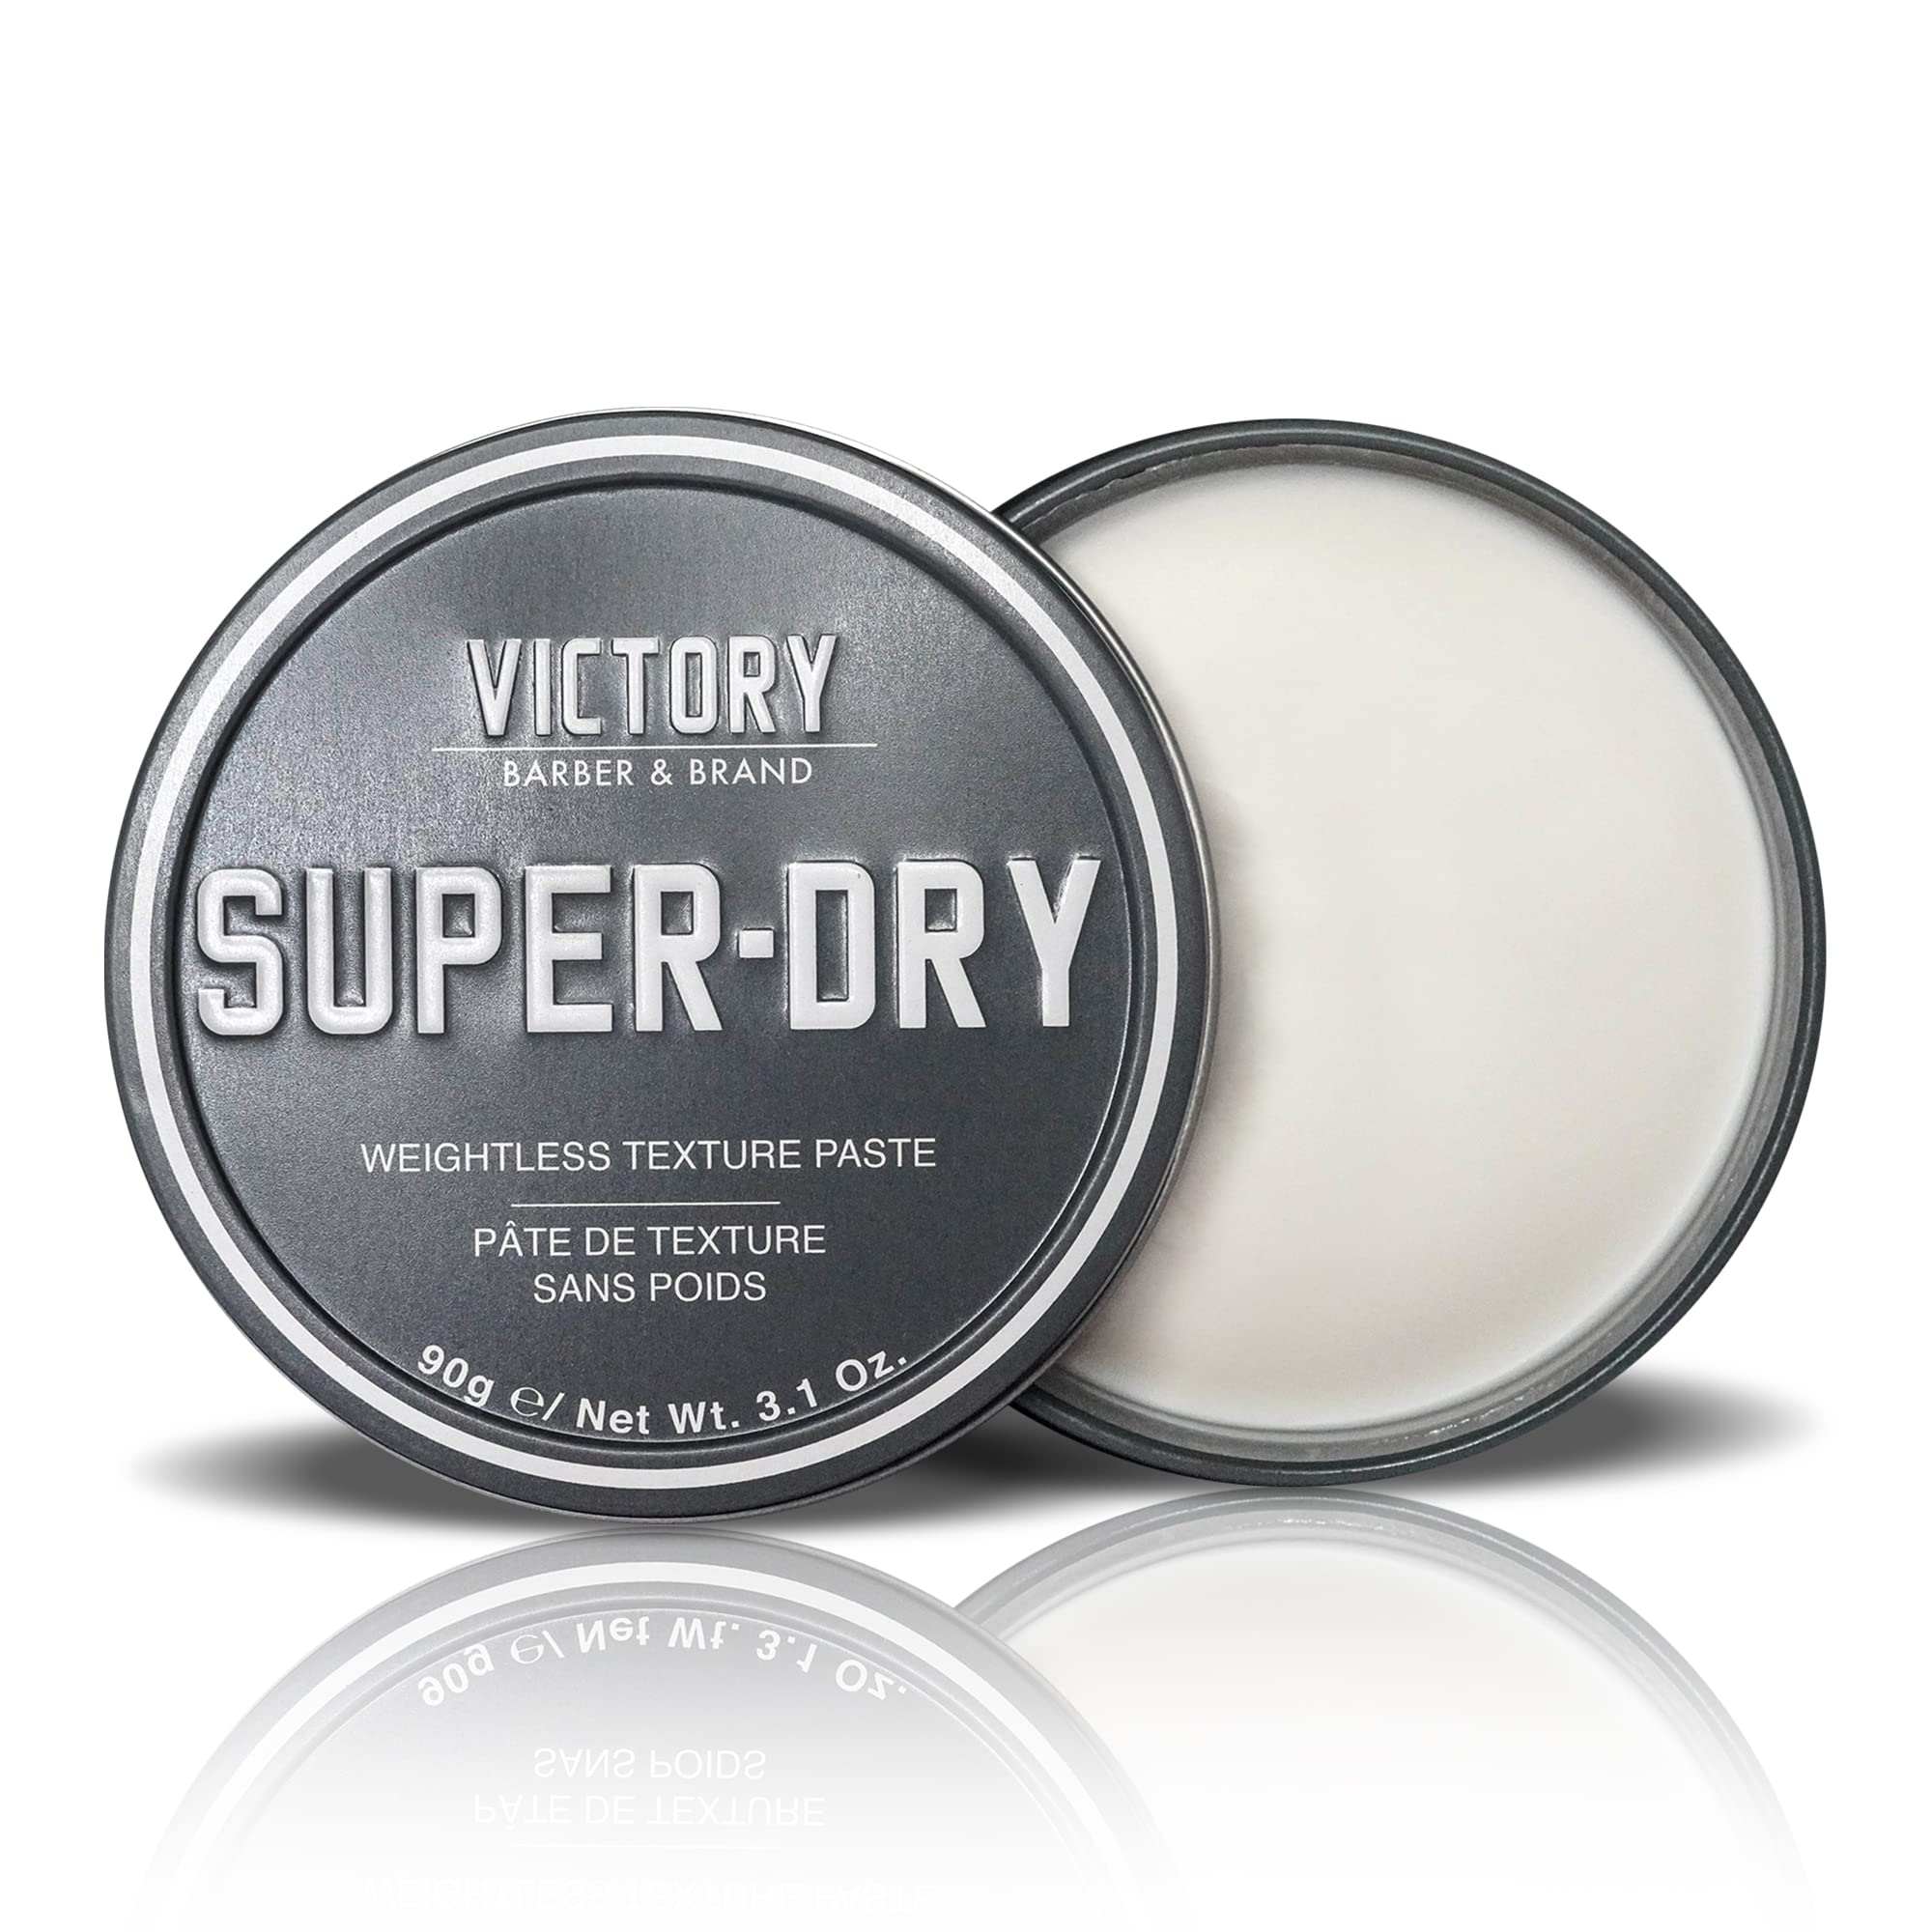 Super-Dry Mens Hair Paste by Victory Barber & Brand | Mens Hair Products  Made in the USA | Matte Hair Product Men Like Better than Matte Hair Gels |  Oil-Free Texture Paste